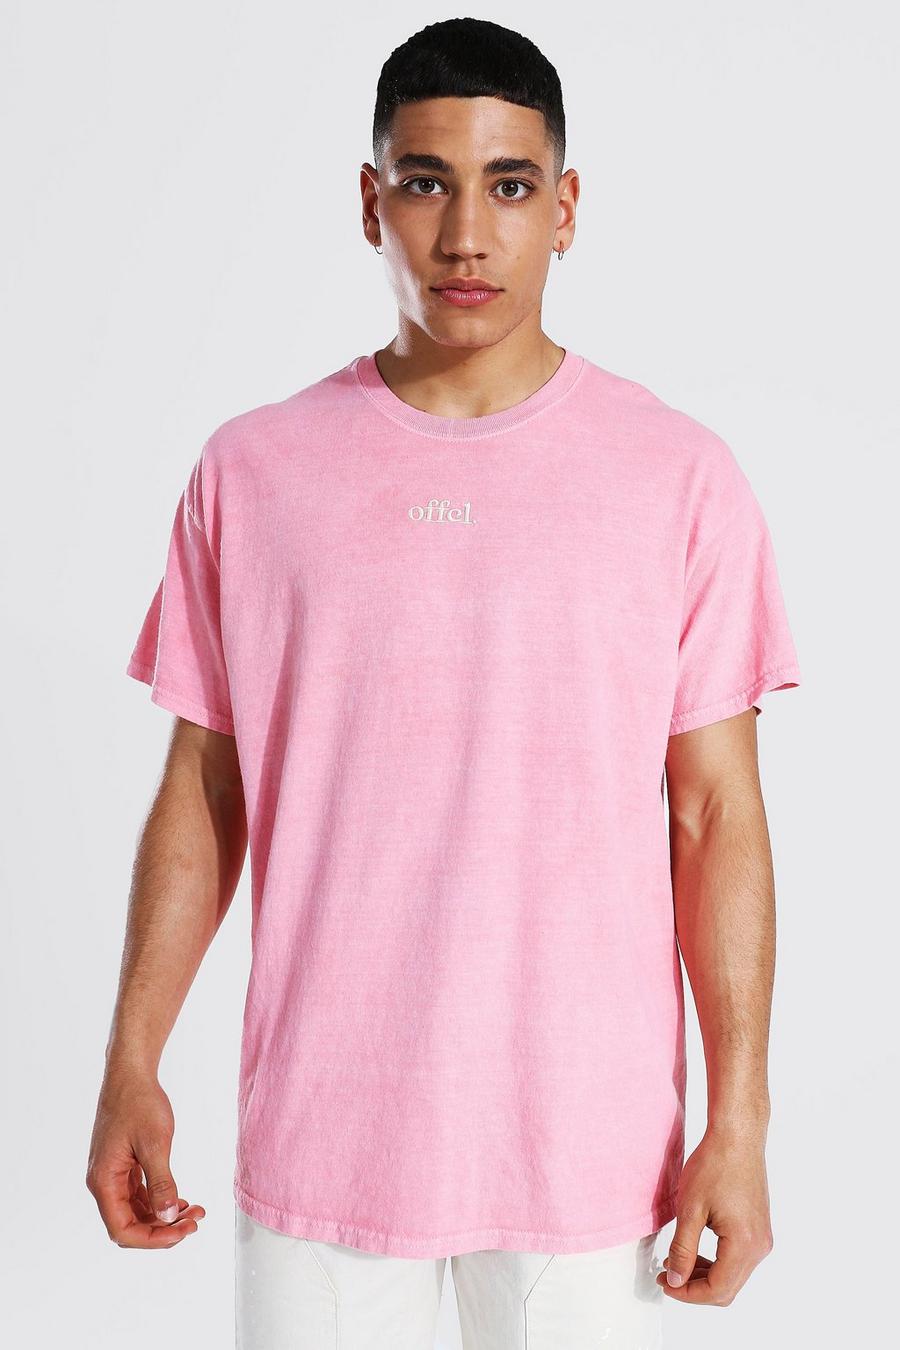 Coral pink Oversized Offcl Man Overdye T-shirt image number 1